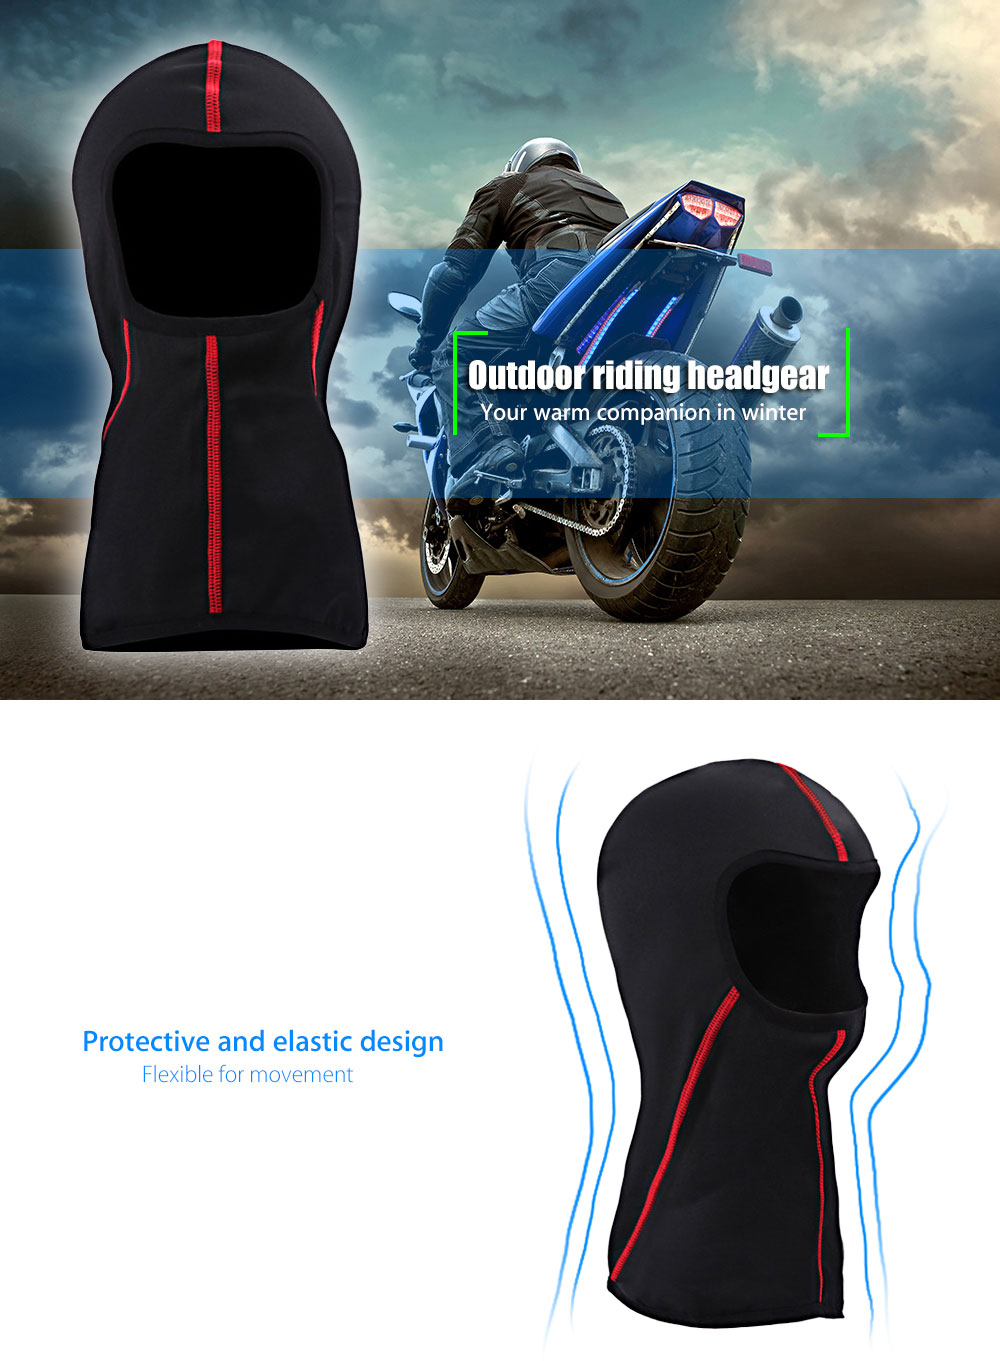 SALETU Breathable Outdoor Sports Riding Headgear Motorcycle Cycling Protect Full Face Mask